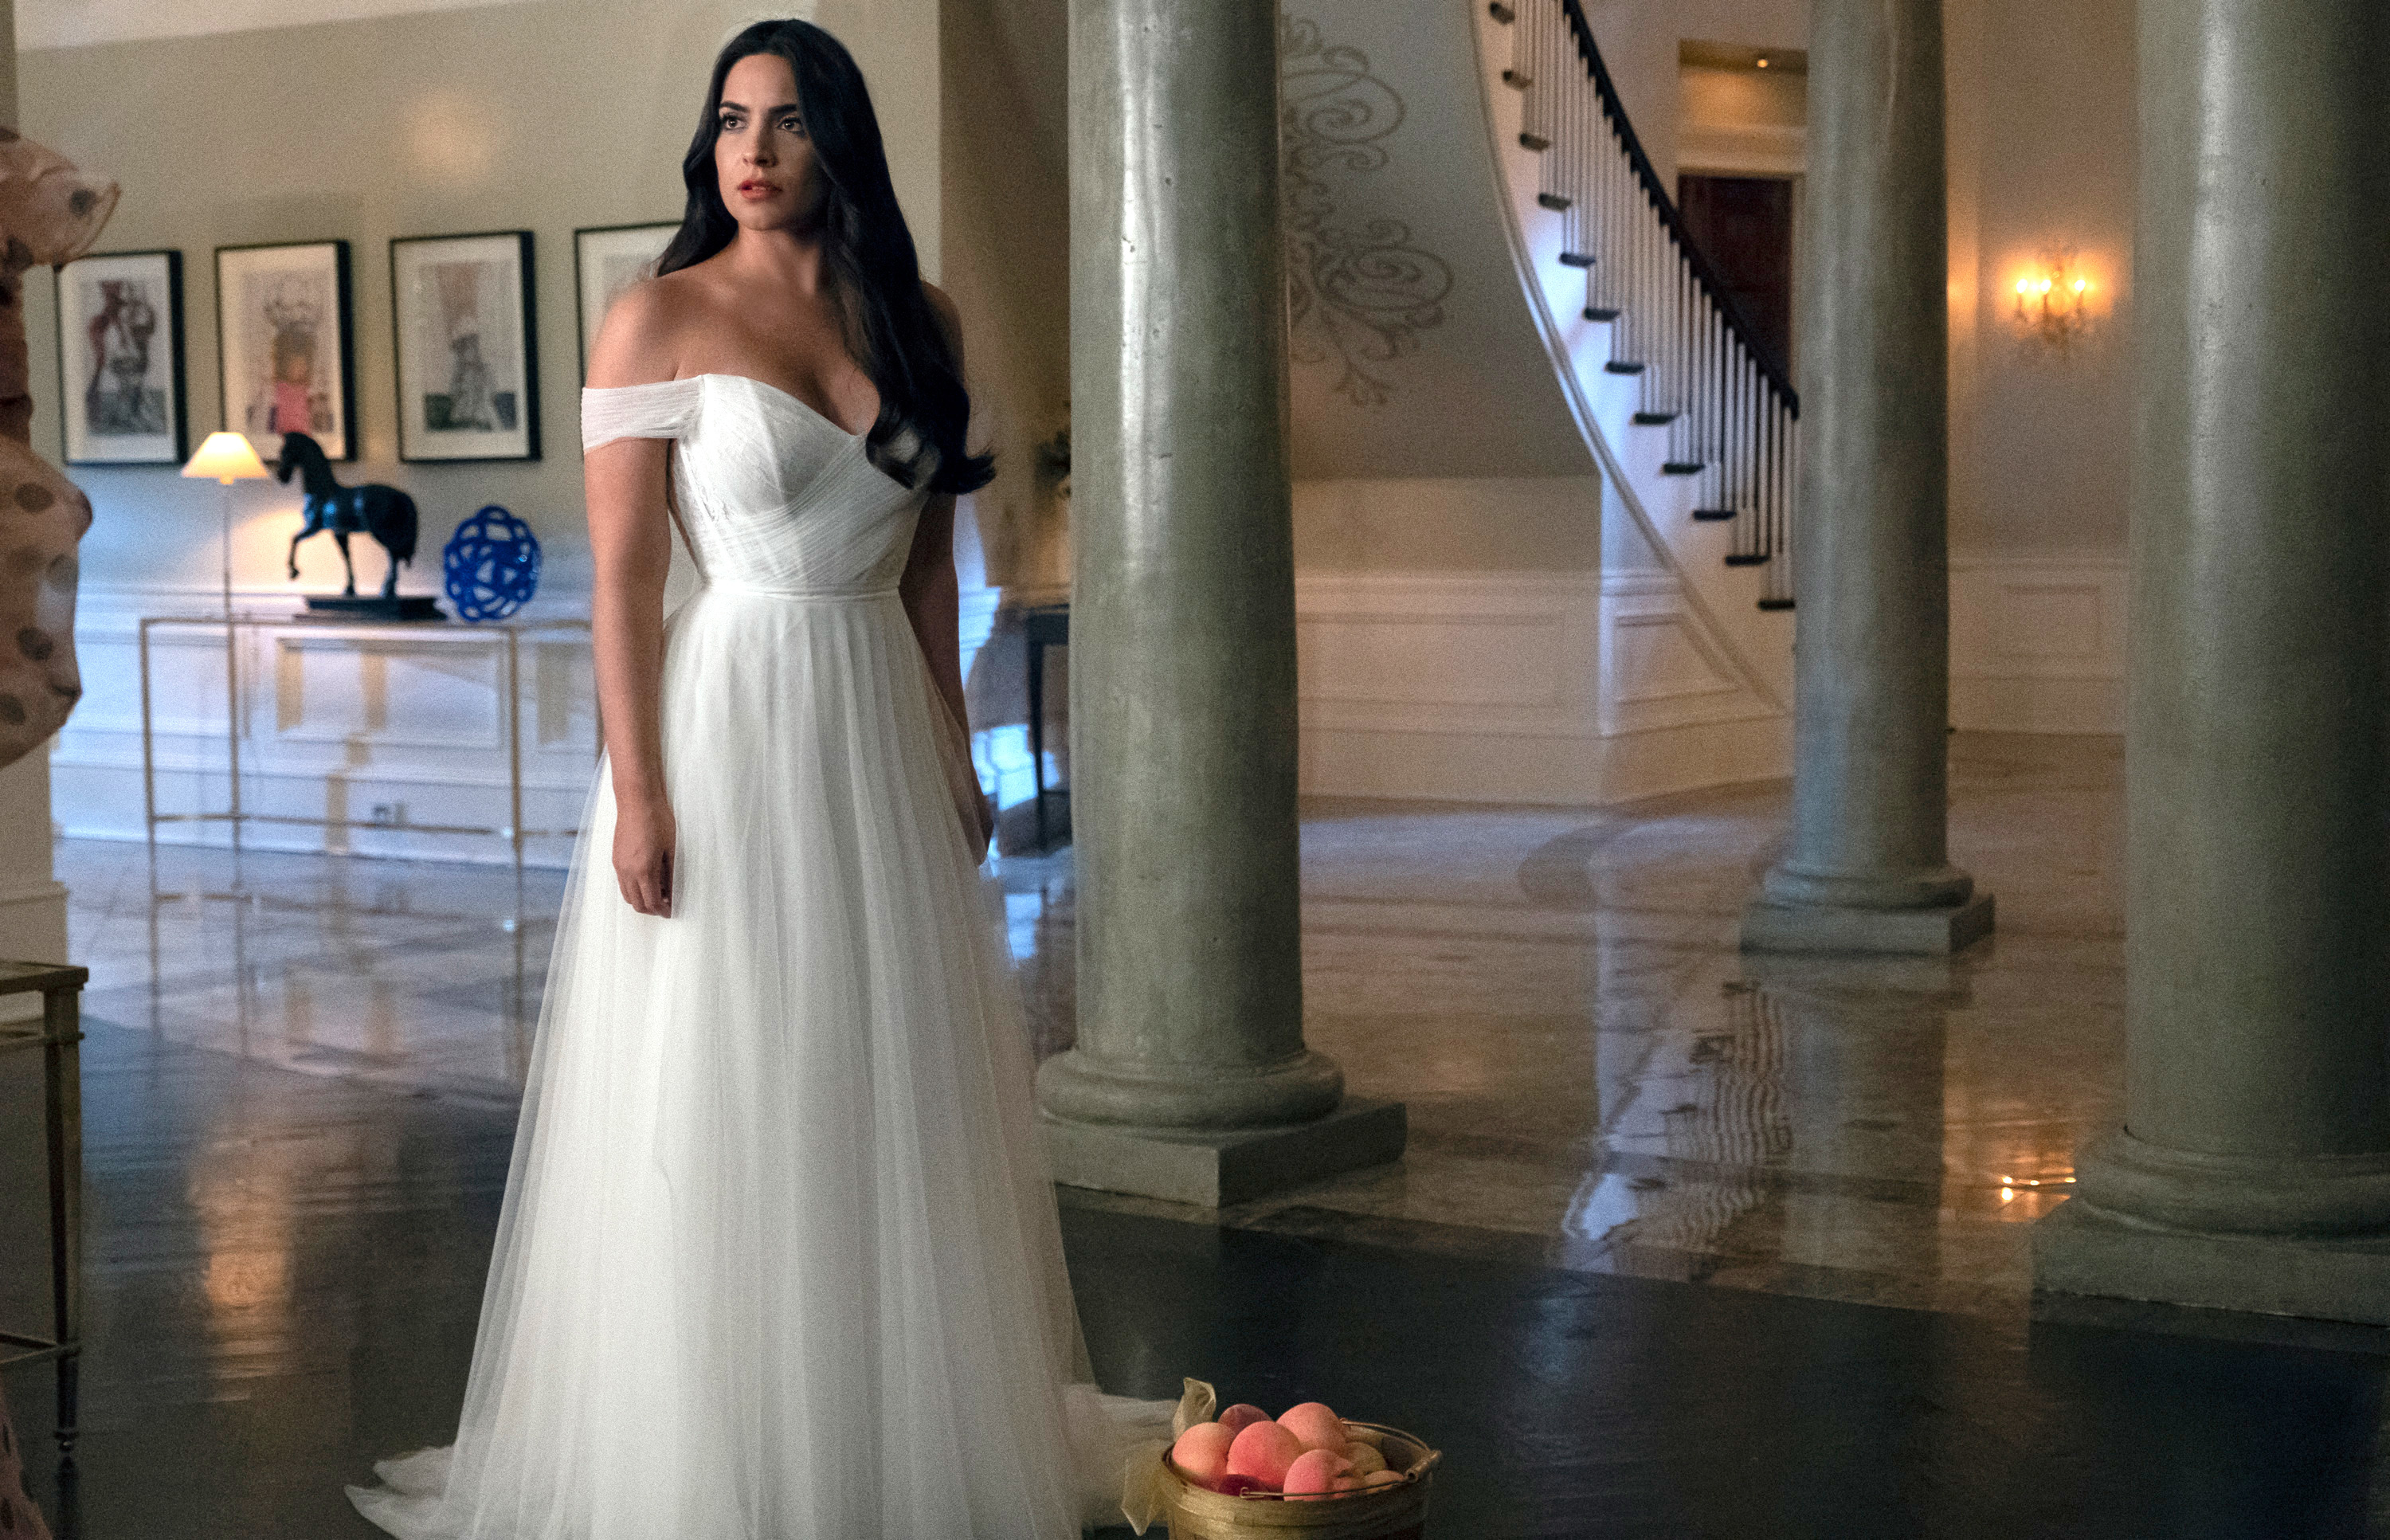 Cristal stands in an elegant off-shoulder bridal gown in a stately, ornate room with columns